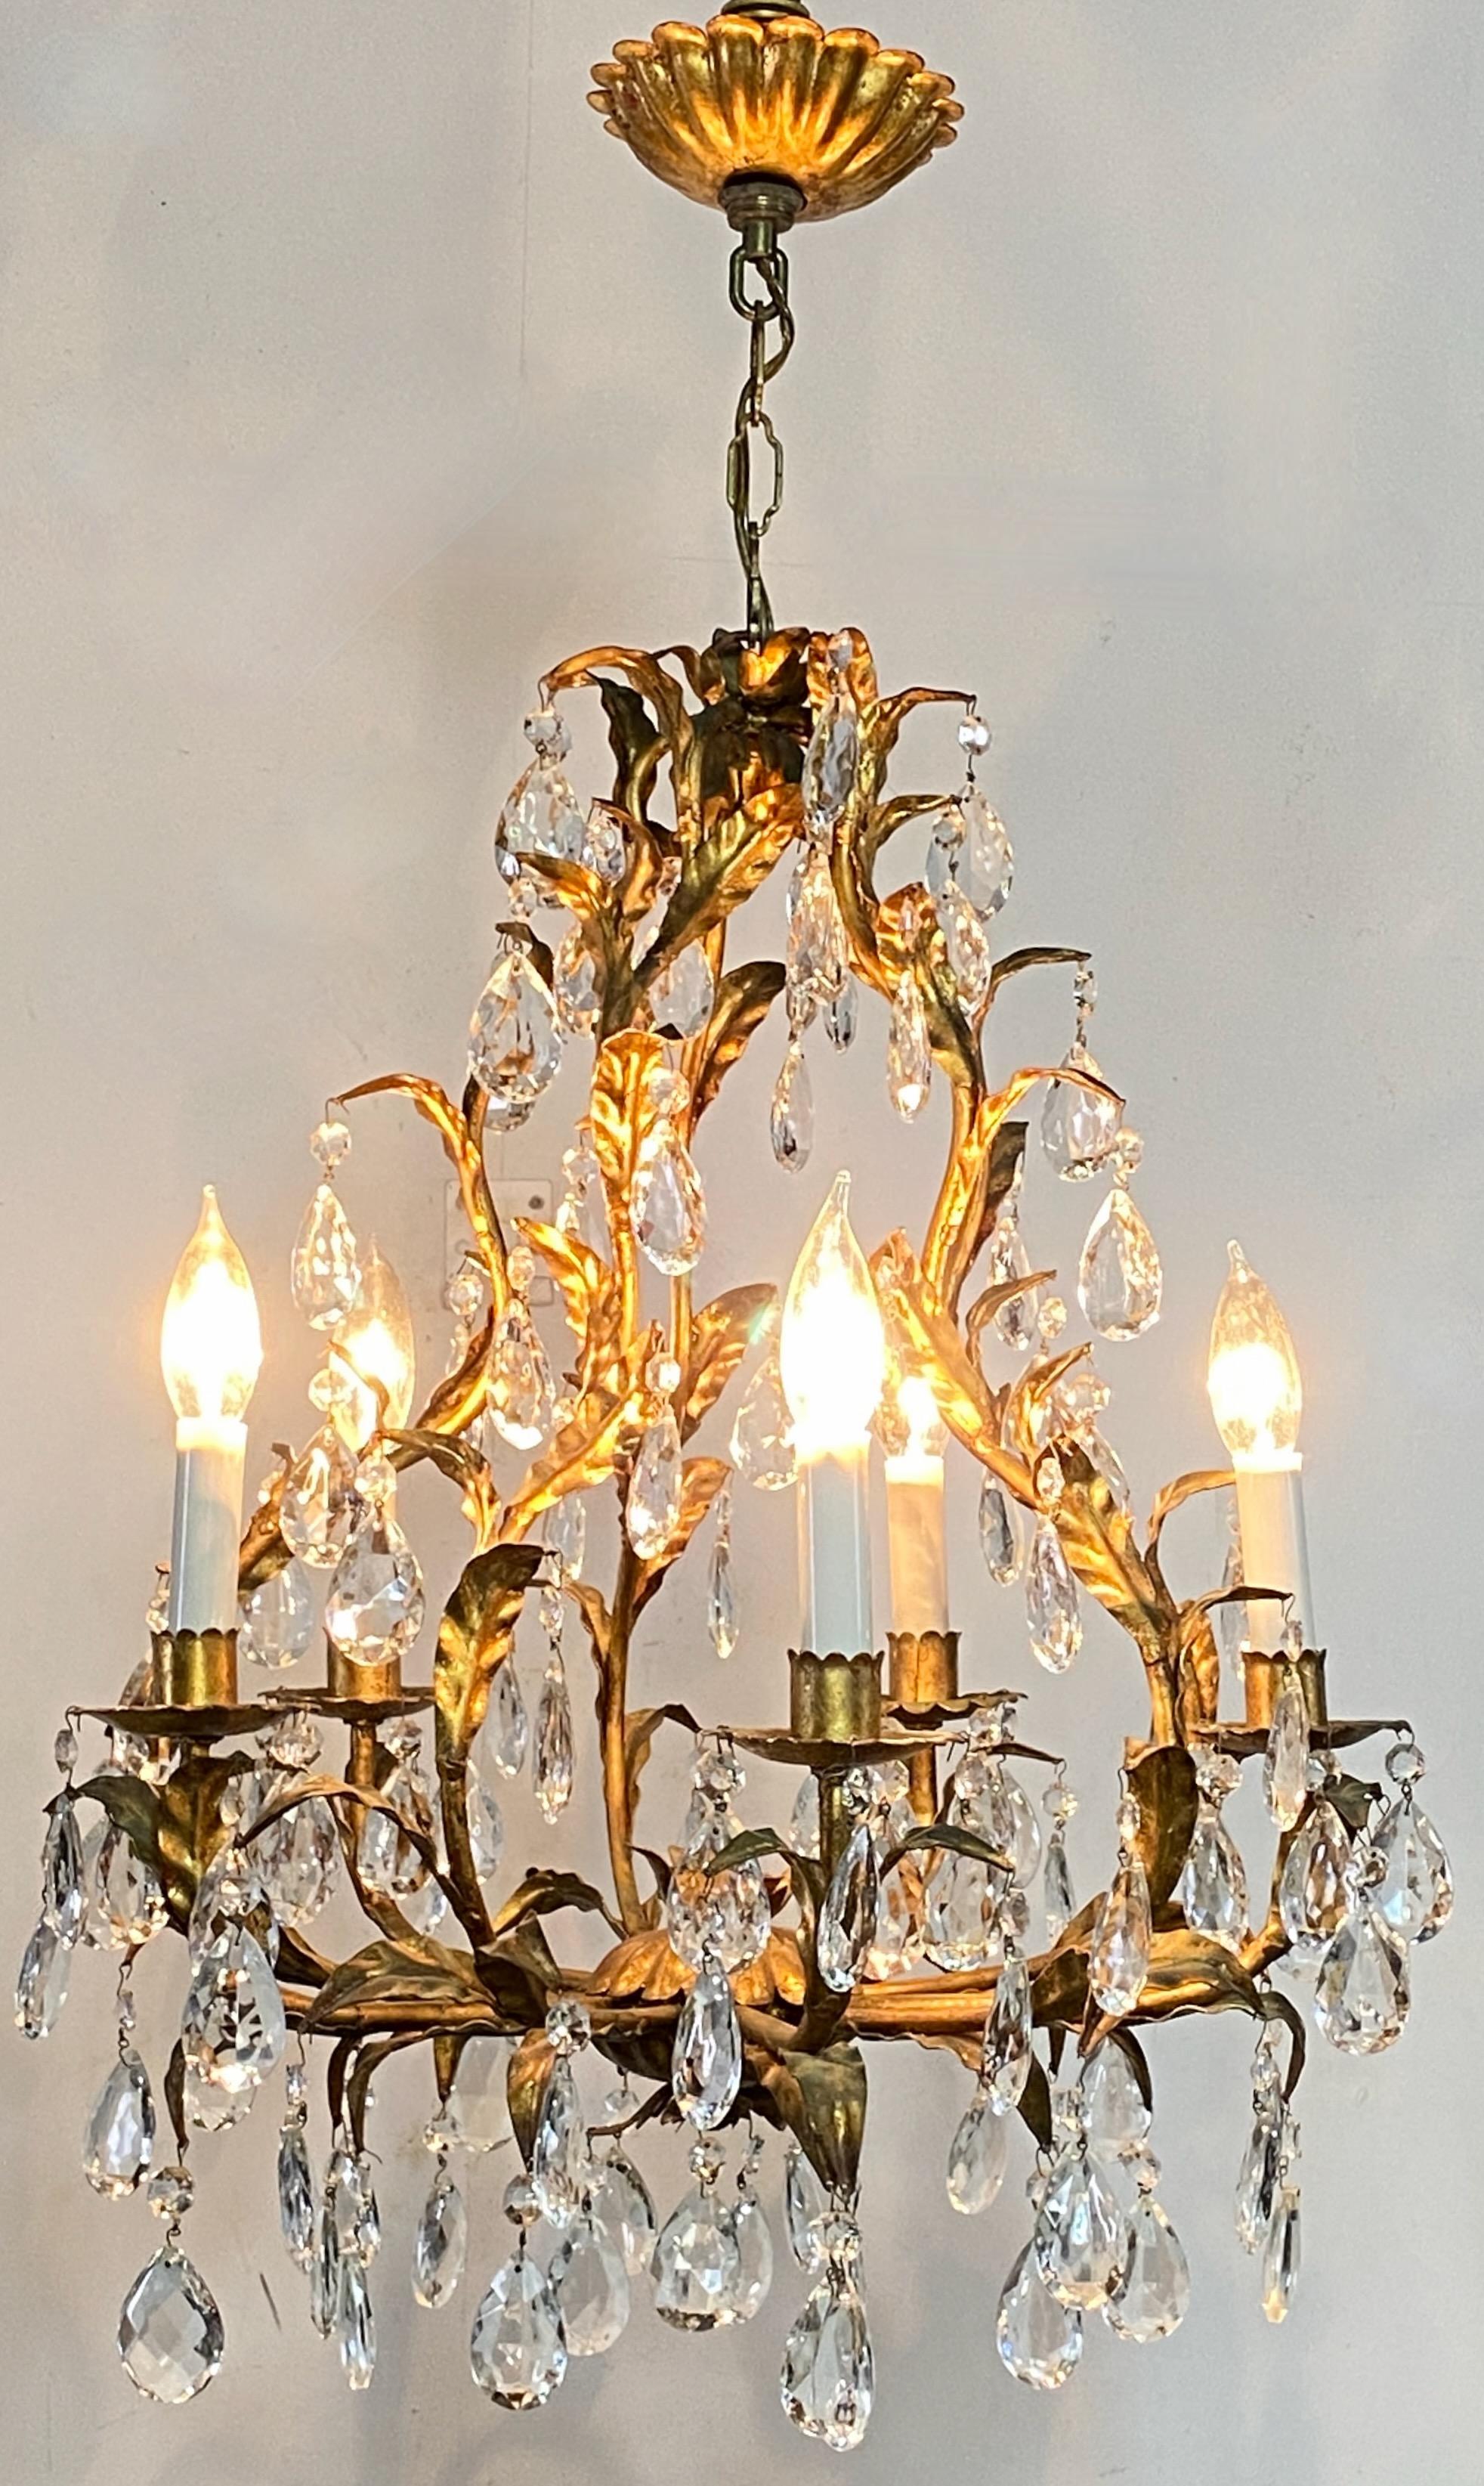 Five light gold painted metal and cut glass multi prism chandelier. 
Cleaned and re-wired, ready to install.
In excellent vintage condition.
Italy, circa 1960.